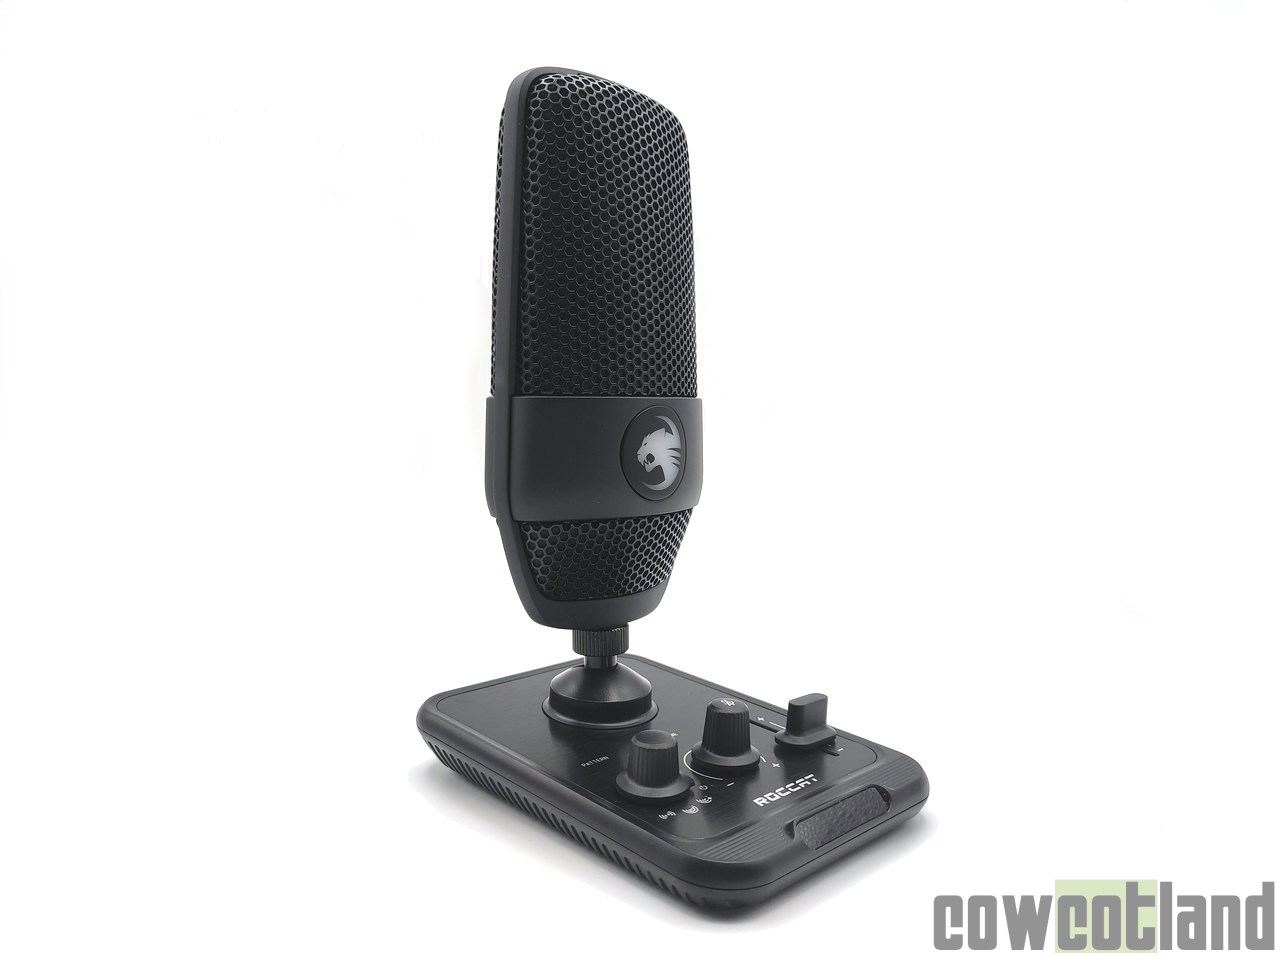 Image 45874, galerie Test micro ROCCAT Torch : ROCCAT se lance dans le micro gaming et streaming 